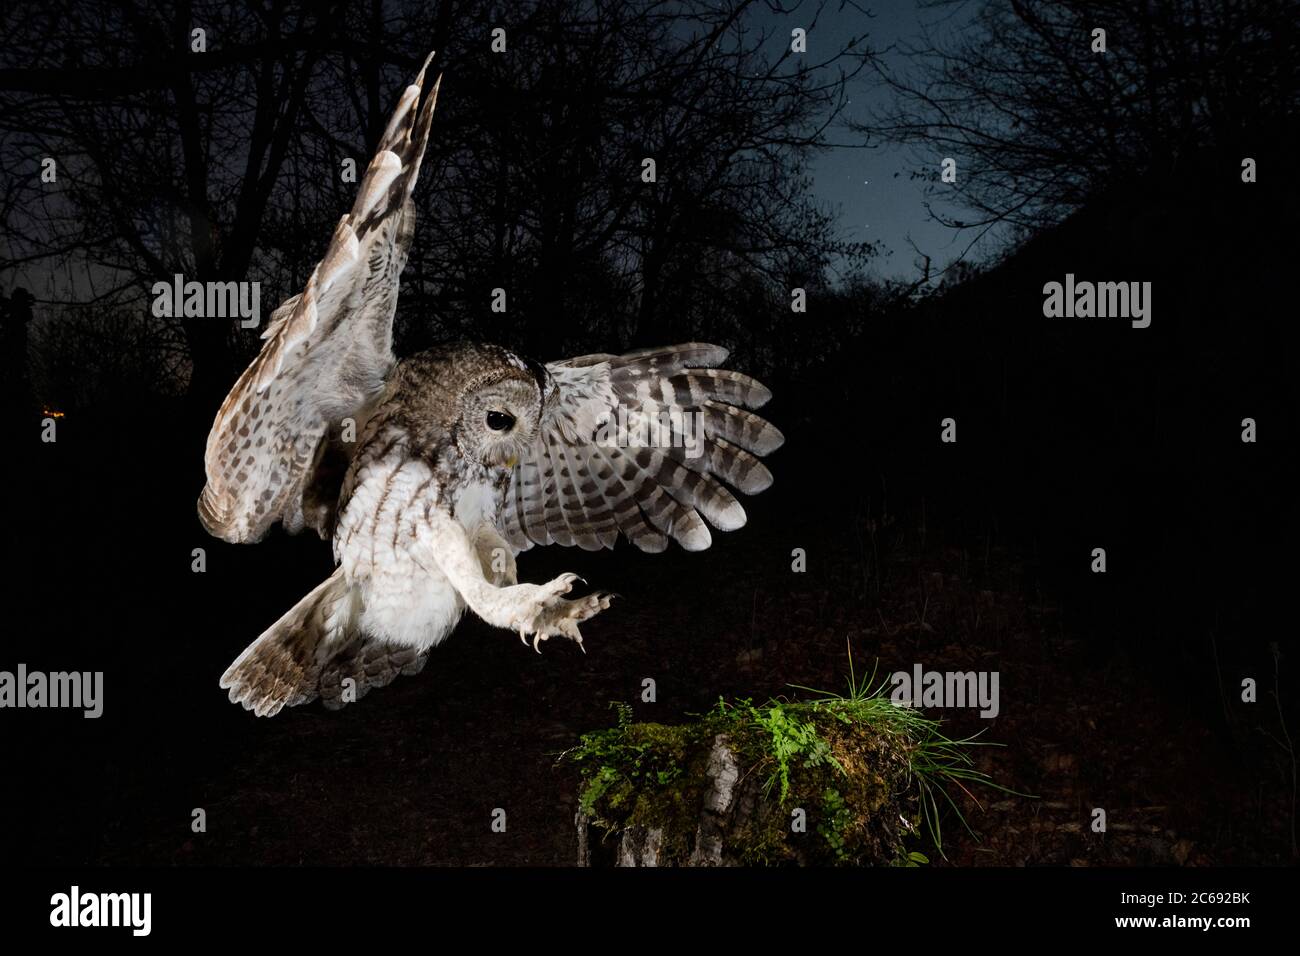 Tawny Owl (Strix aluco) in the Aosta valley in northern Italy. Landing with claws outstretched on a tree stump at dusk with star filled sky in the bac Stock Photo